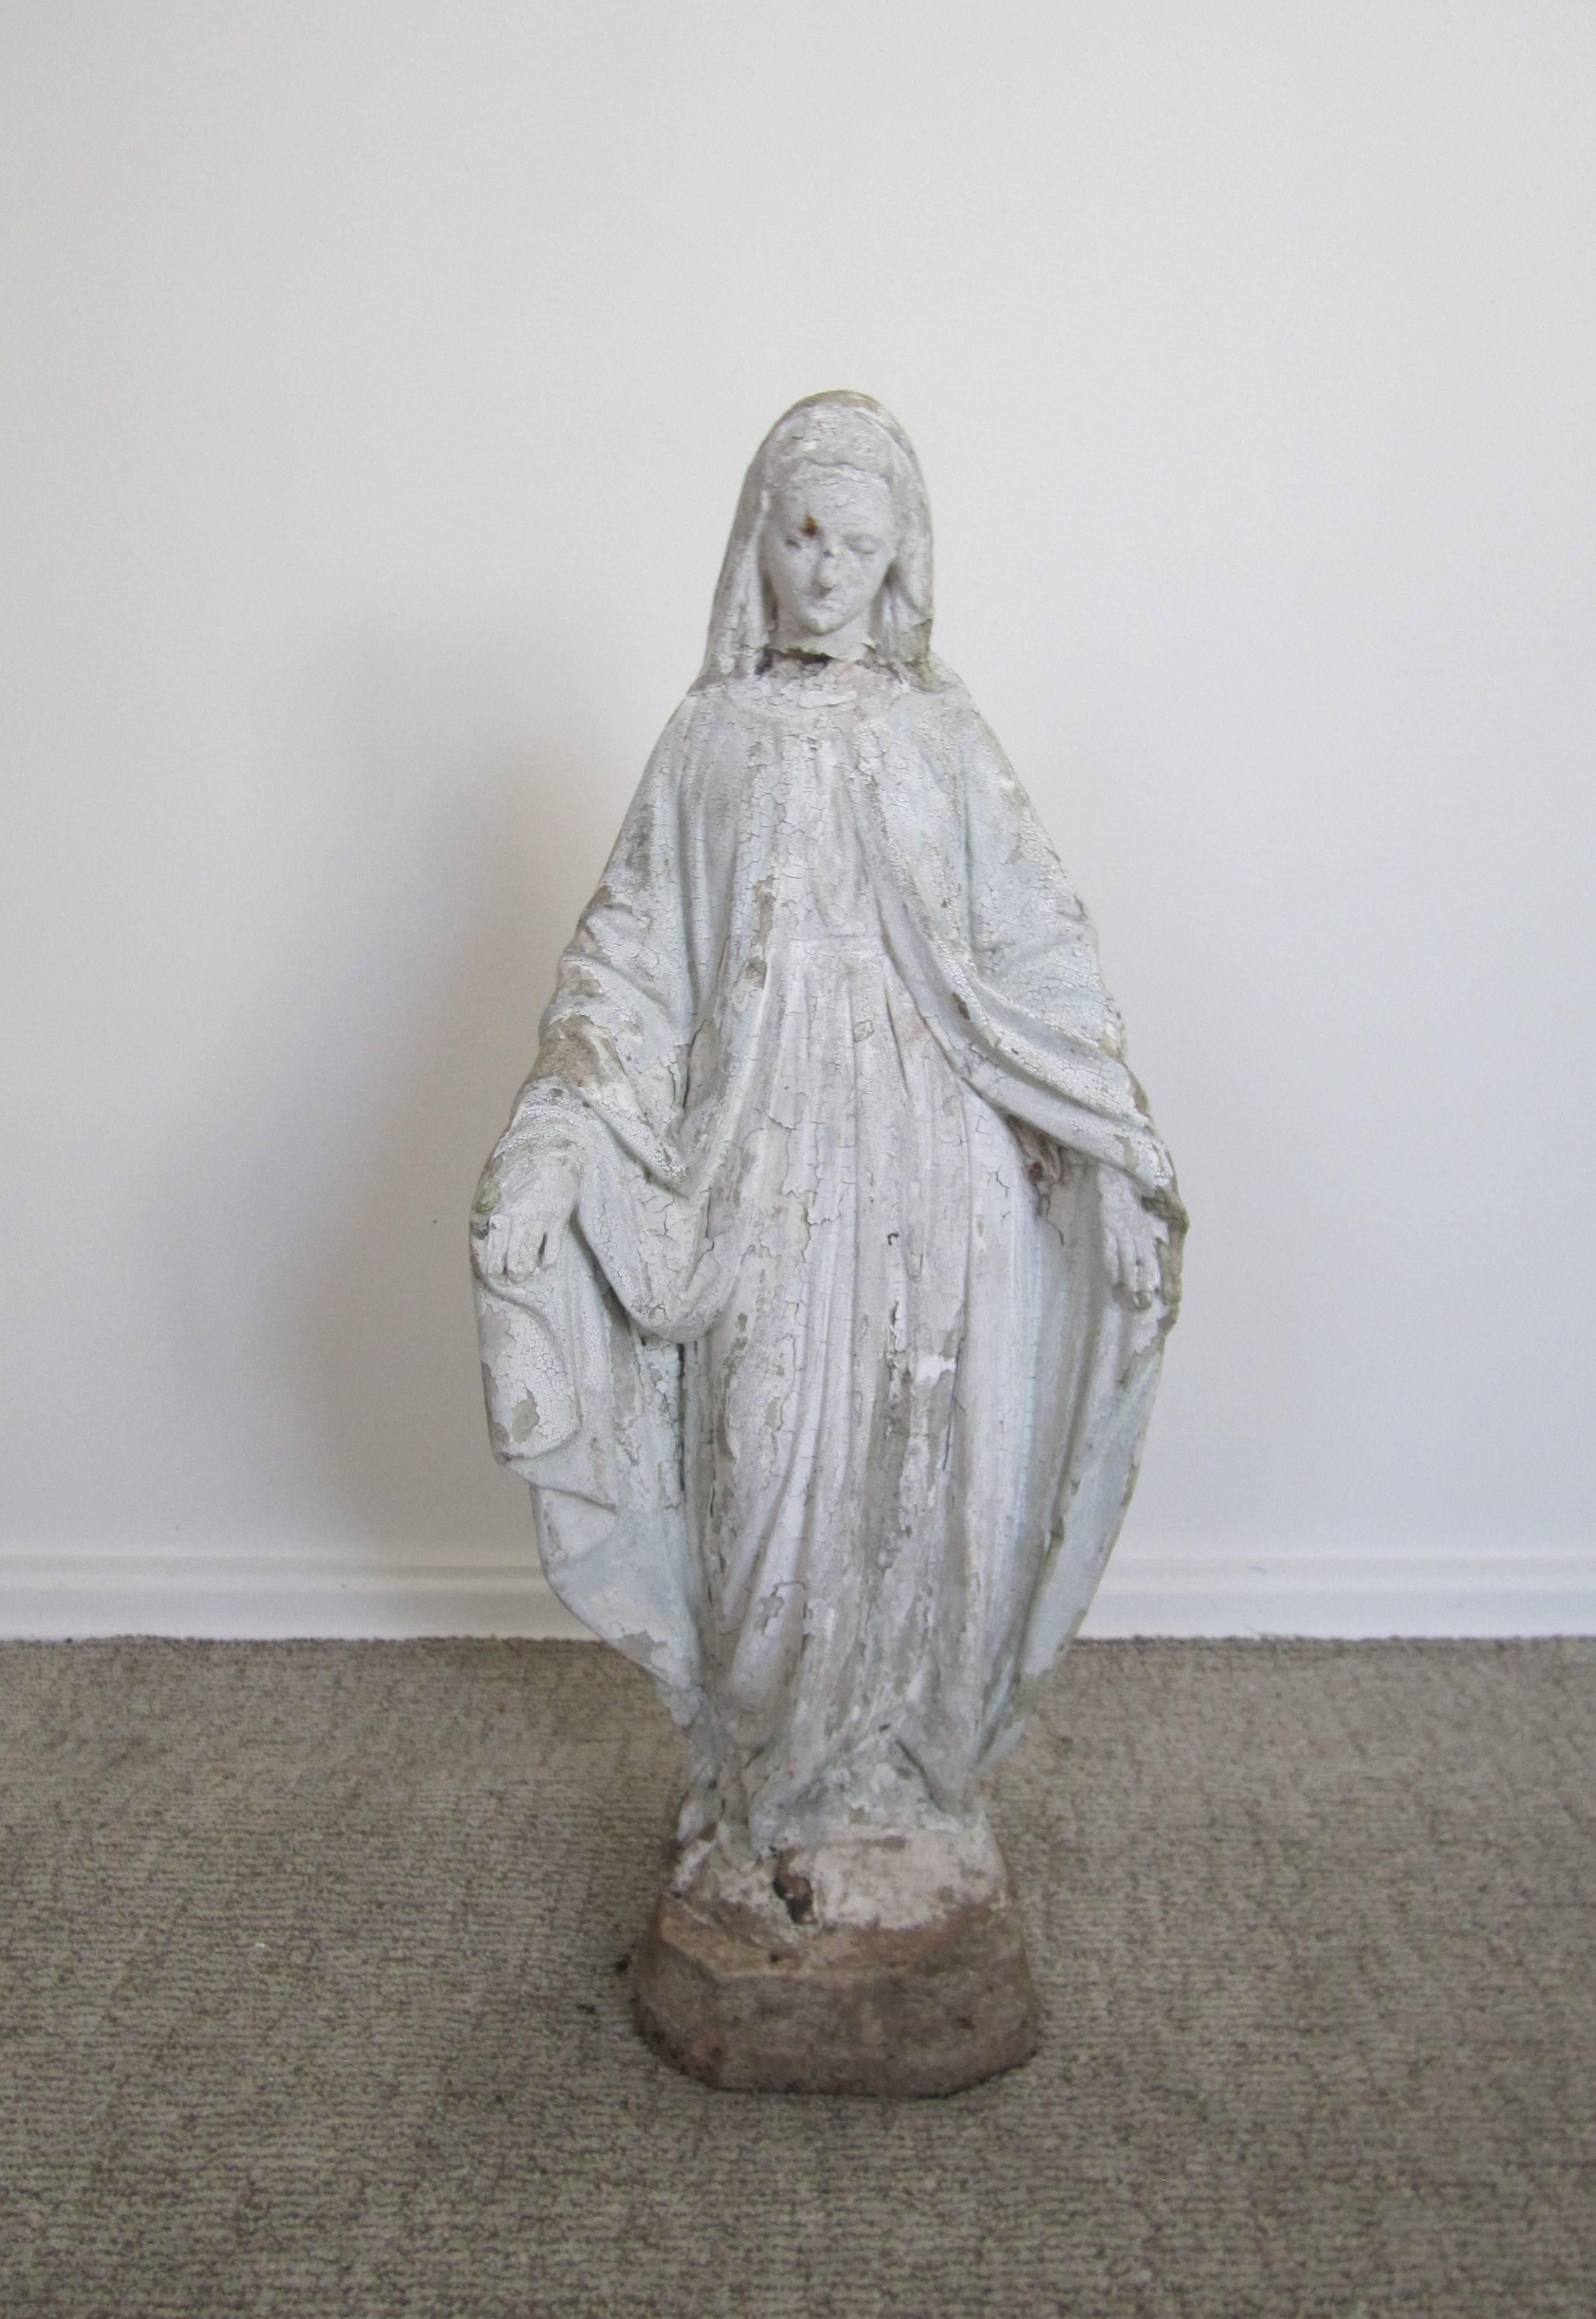 A beautiful vintage 'Madonna', 'Blessed Mother' or 'Virgin Mary', painted cement sculpture garden statue. Expected weathered look and feel consistent with age.
Measurements include: 25.5